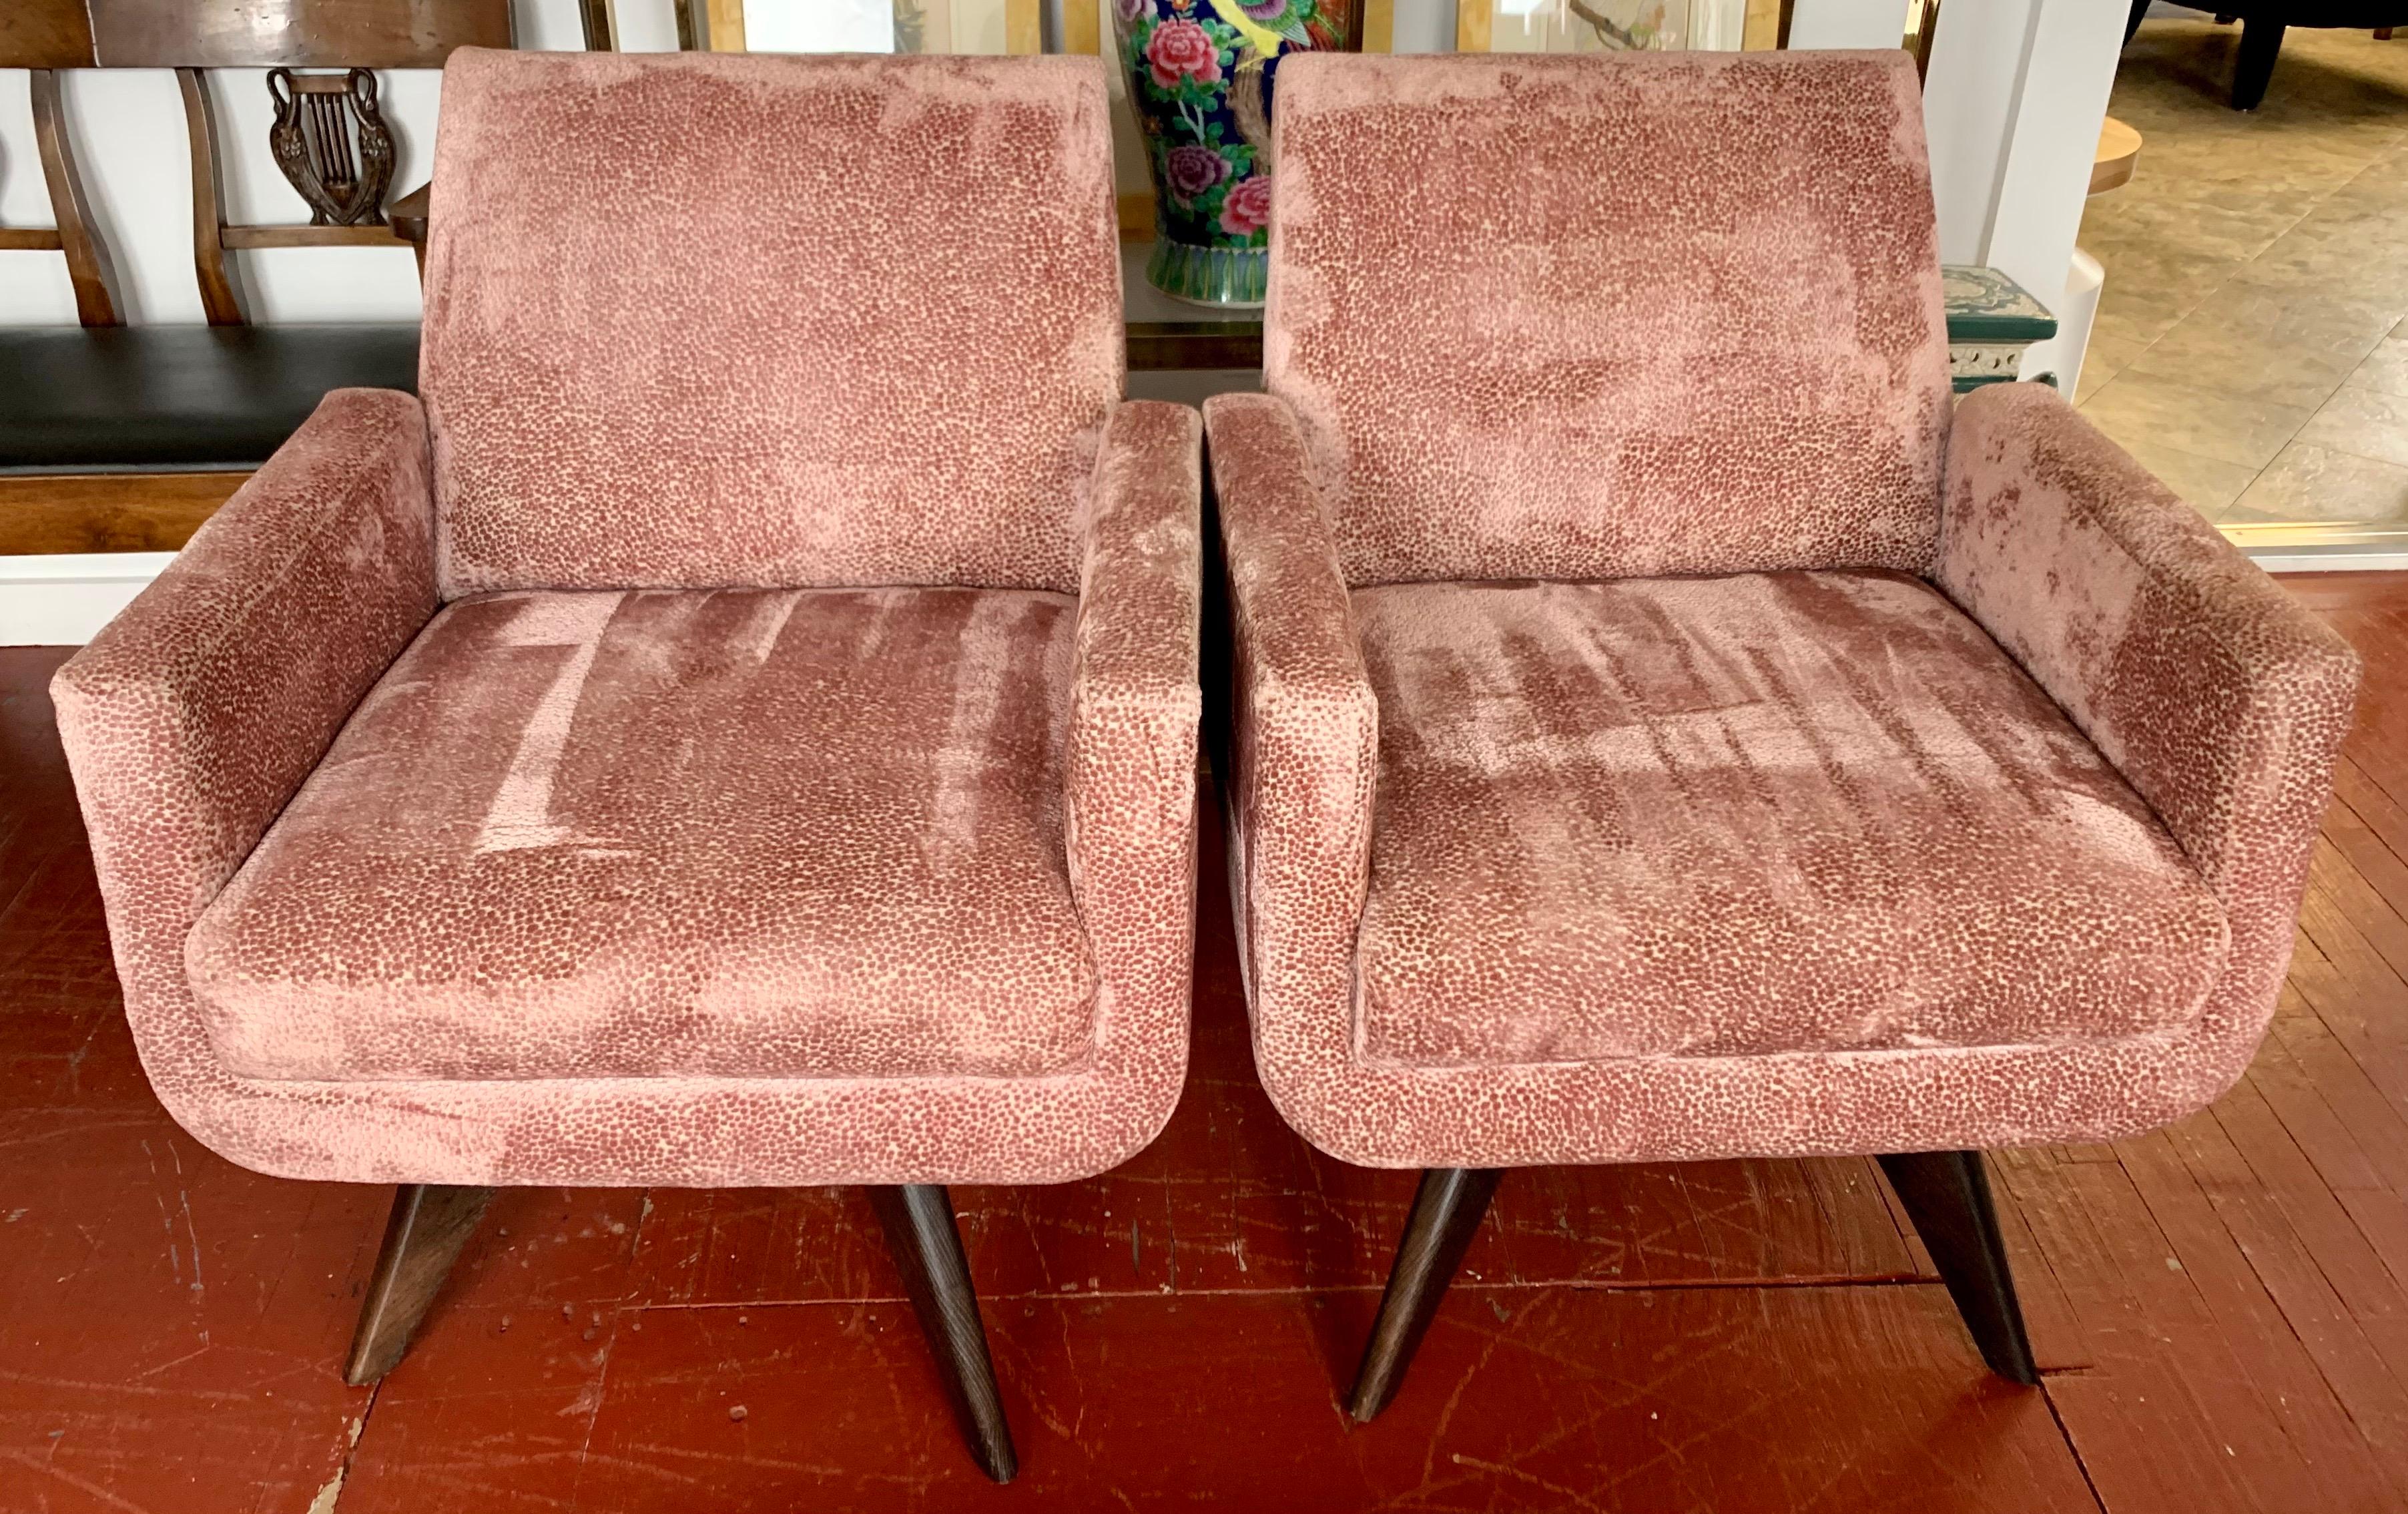 With it's brand new salmon embossed velvet upholstery, this pair of tall swivel chairs really makes a
statement. The color is bold and subtle at the same time and the lines are gorgeous. Now, more than ever, home is where the heart is.